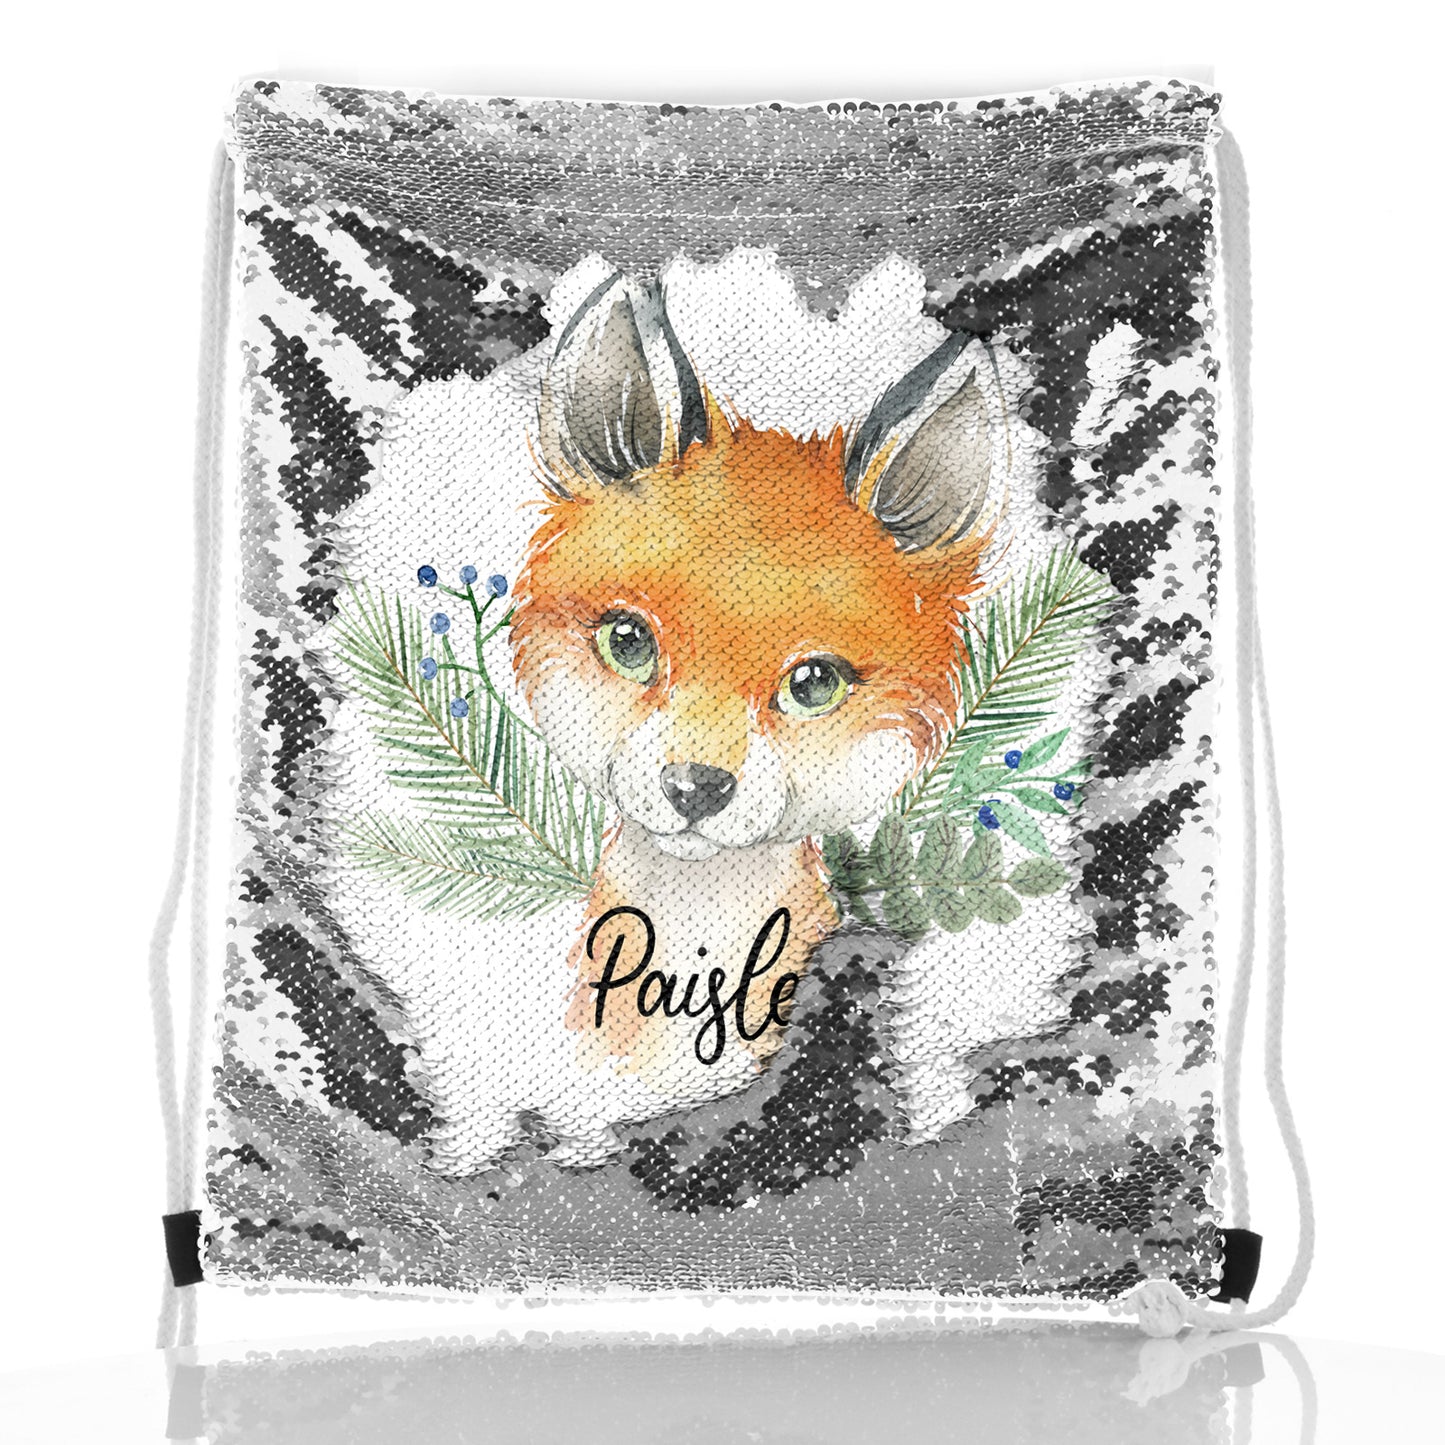 Personalised Sequin Drawstring Backpack with Red Fox Blue Berries and Cute Text